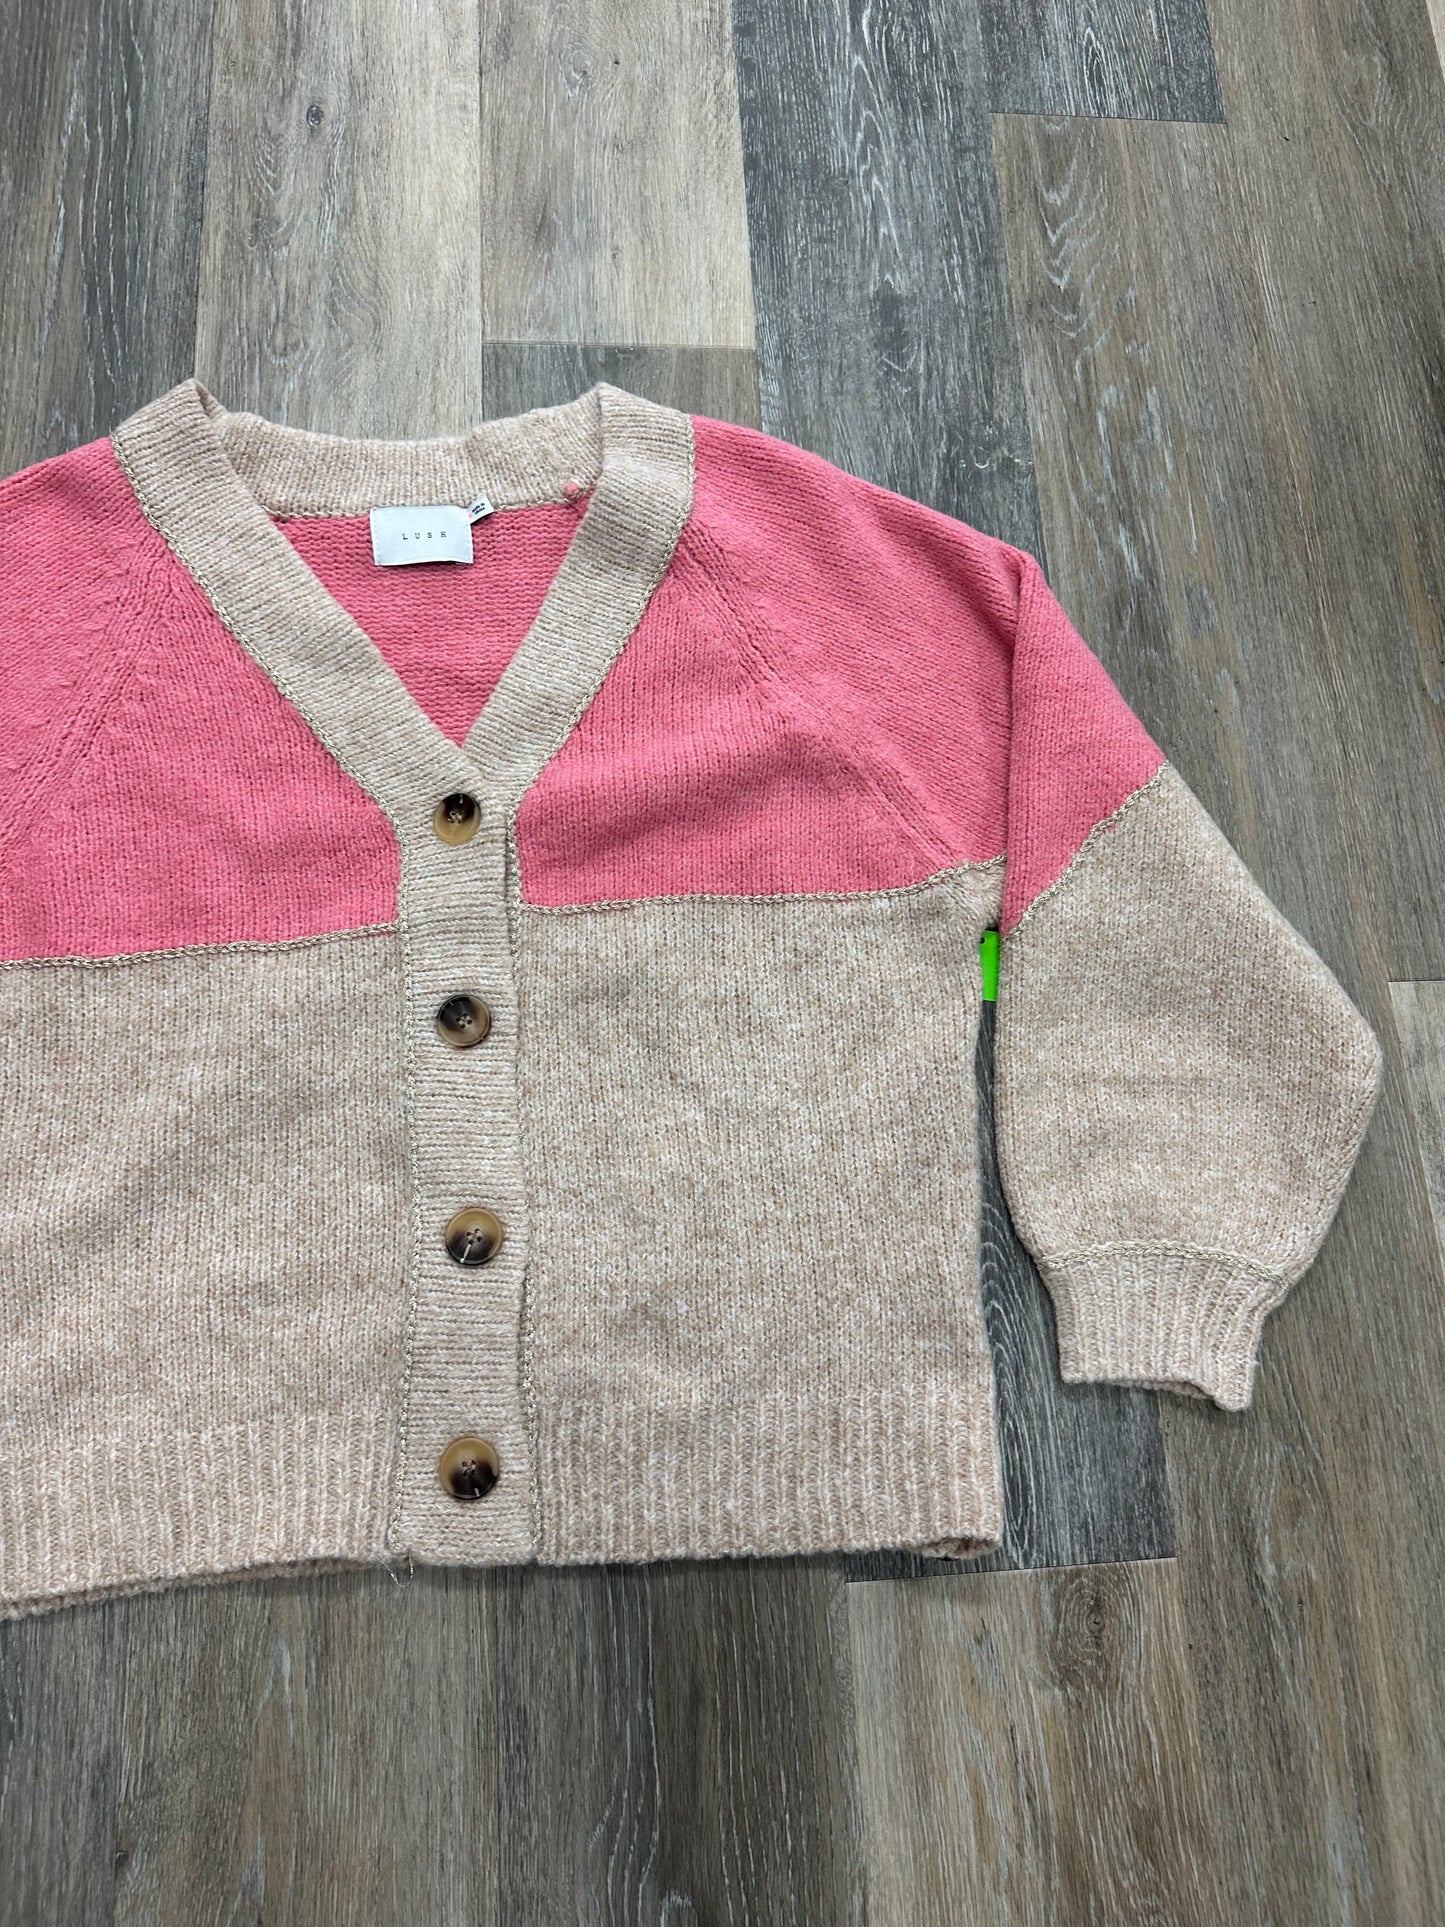 Sweater By Lush  Size: S